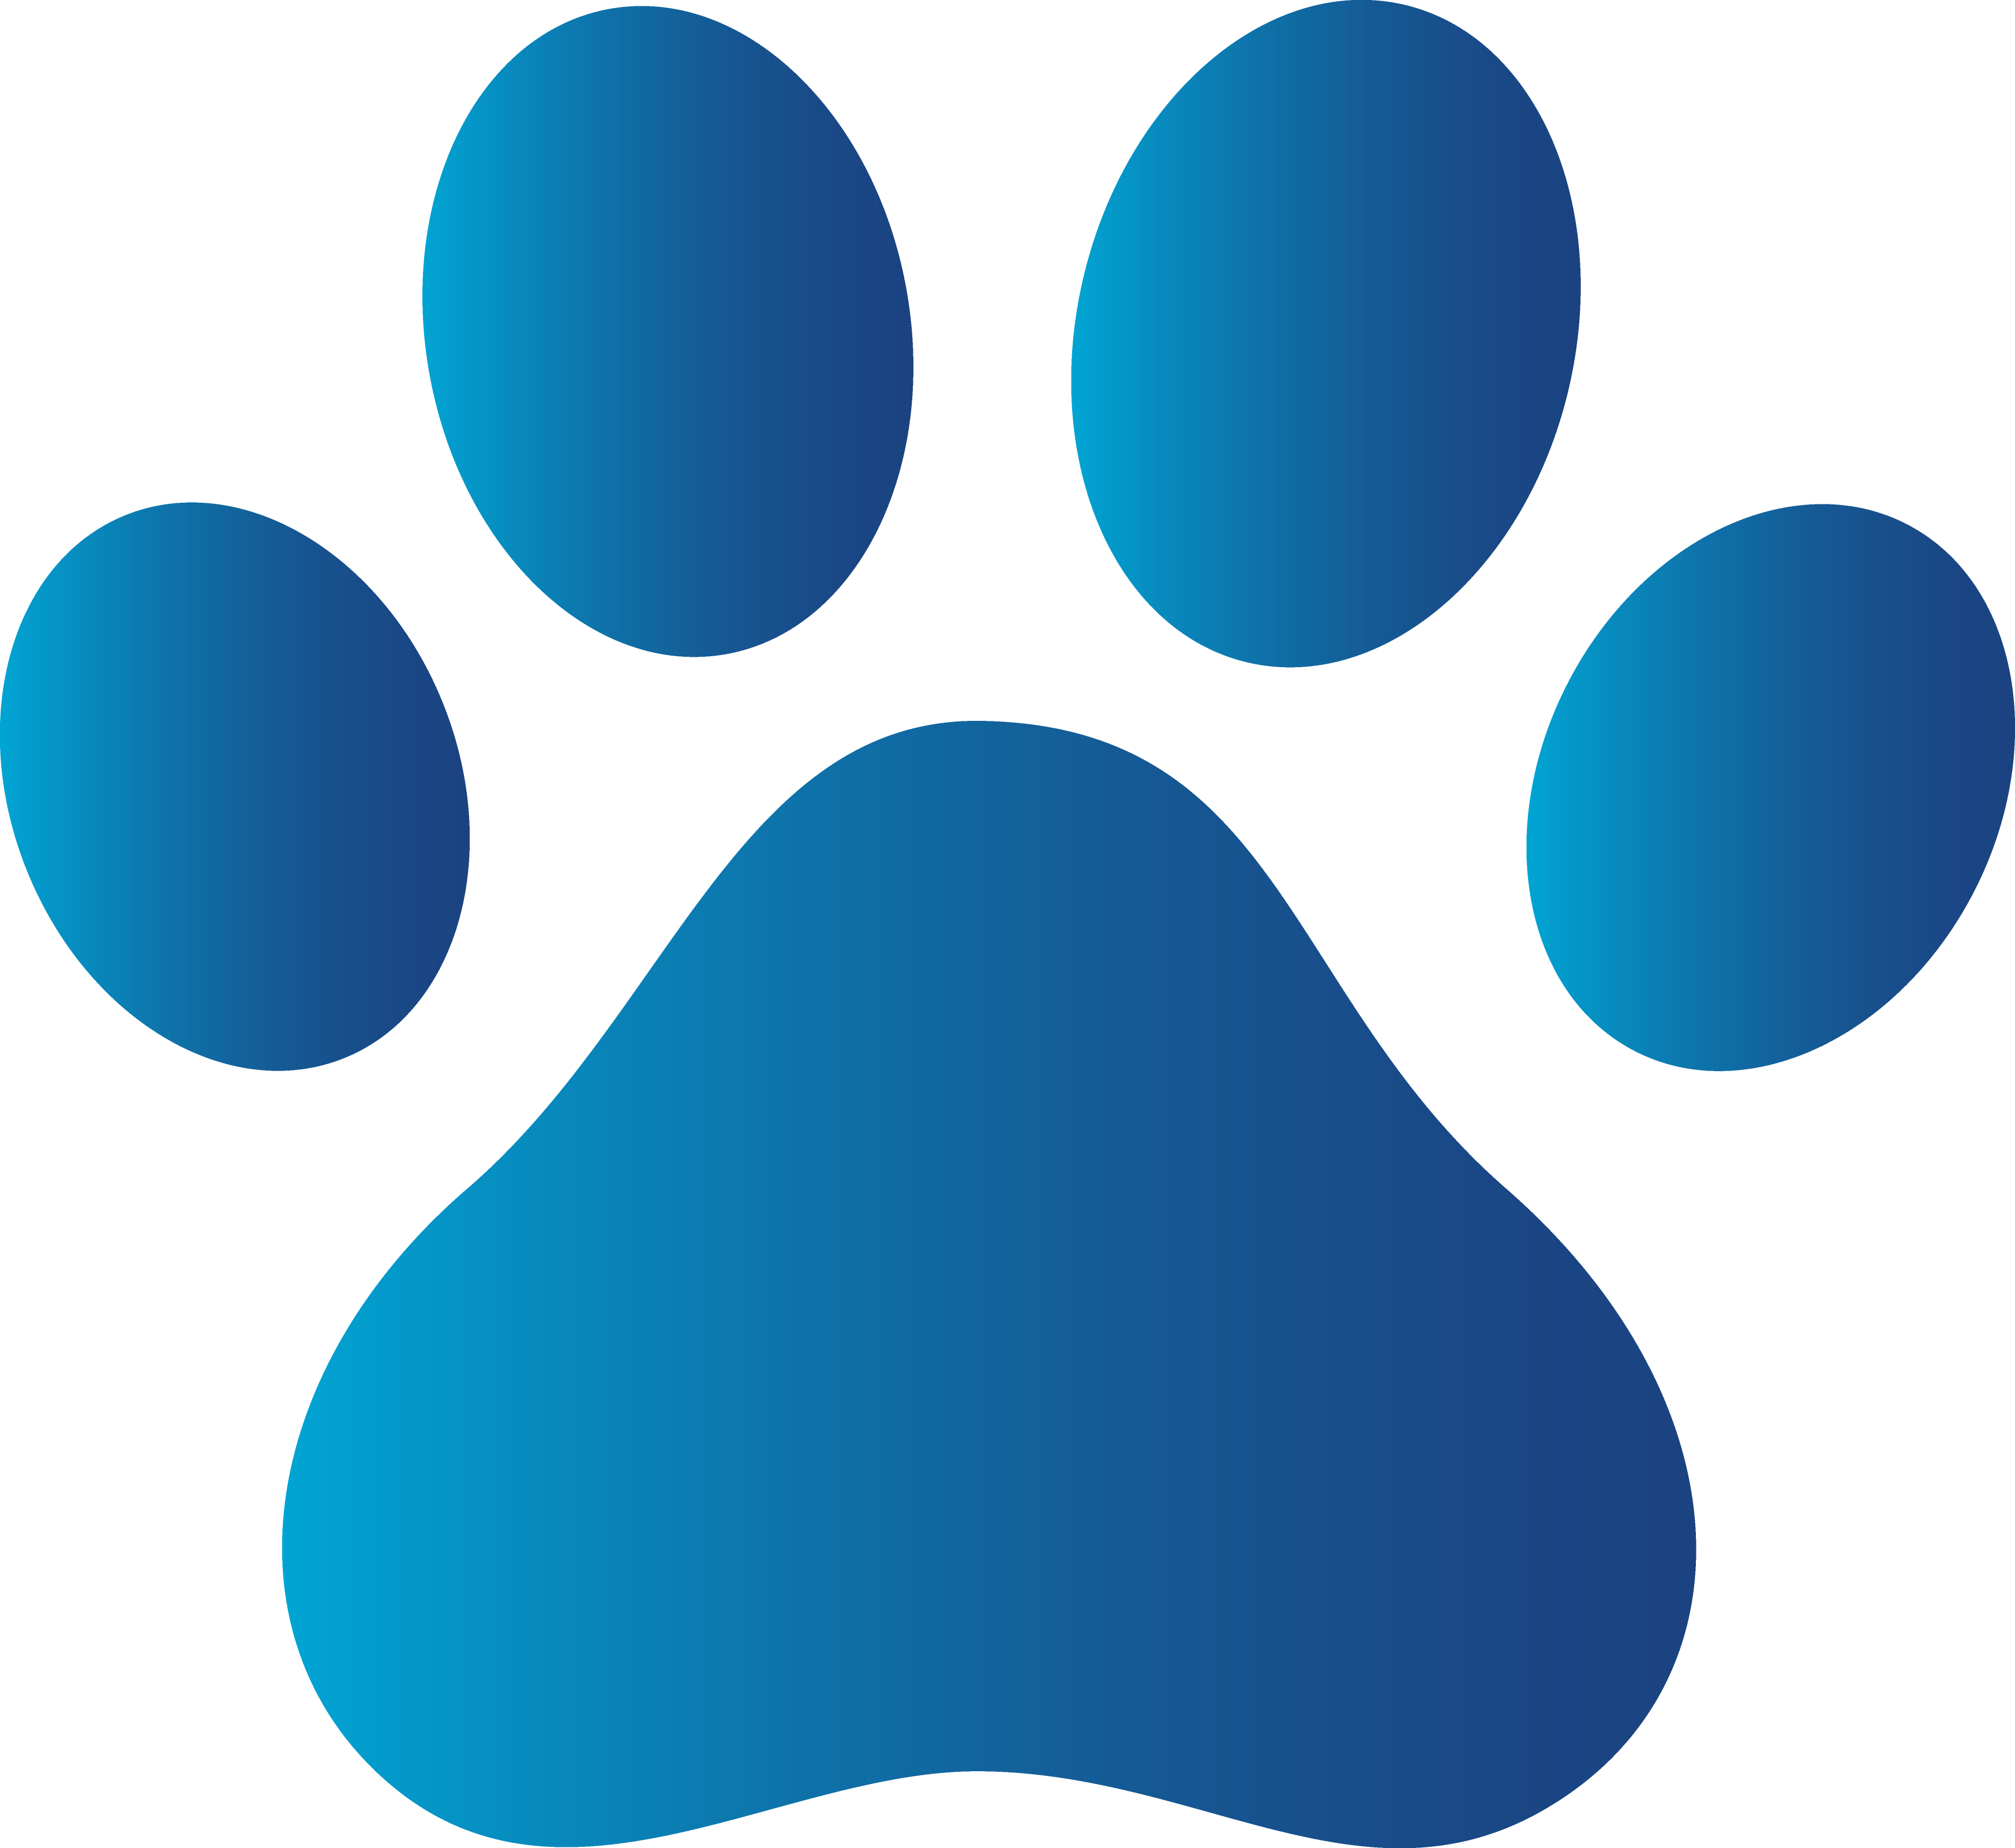 Free Dog Paw Pictures, Download Free Dog Paw Pictures png images, Free